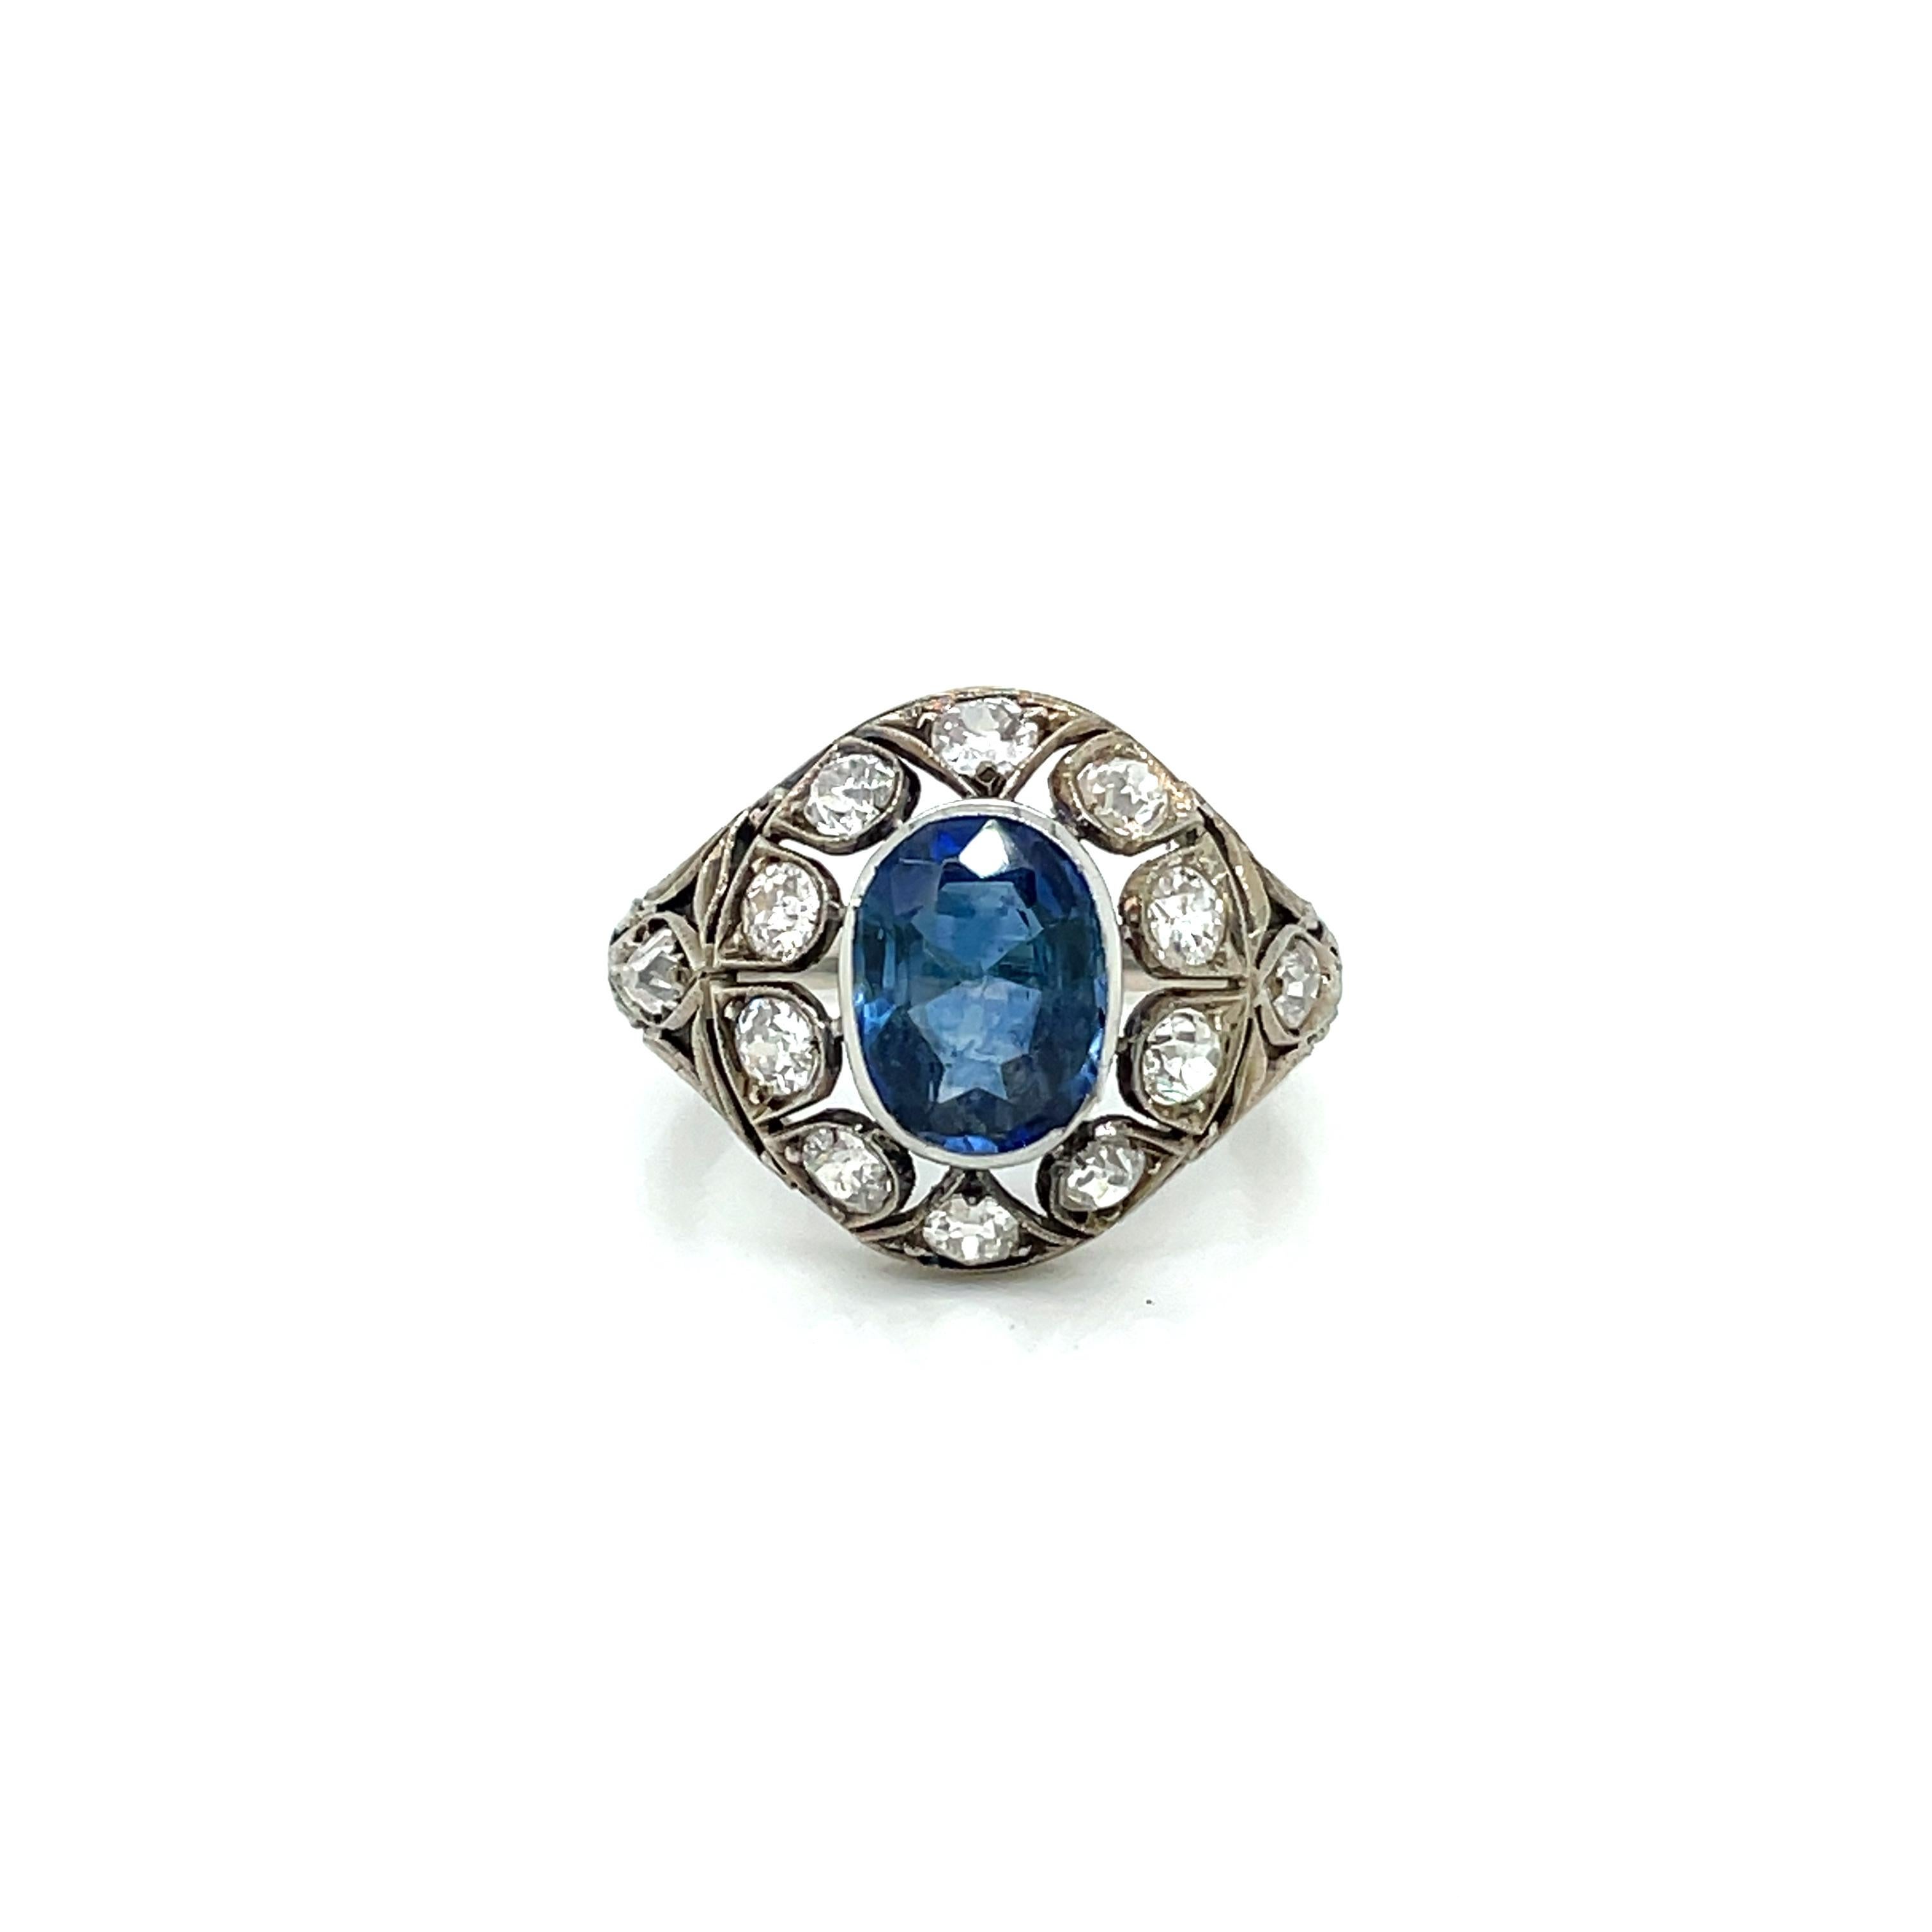 An exquisite filigree ring set in 18k gold, authentic from Art Nouveau era, featuring a beautiful 2.44 ct Oval-cut Sapphire, surrounded by 2.50 carats of old cut diamonds. 
The Sapphire is accompanied by a Gemological certificate.

There are not